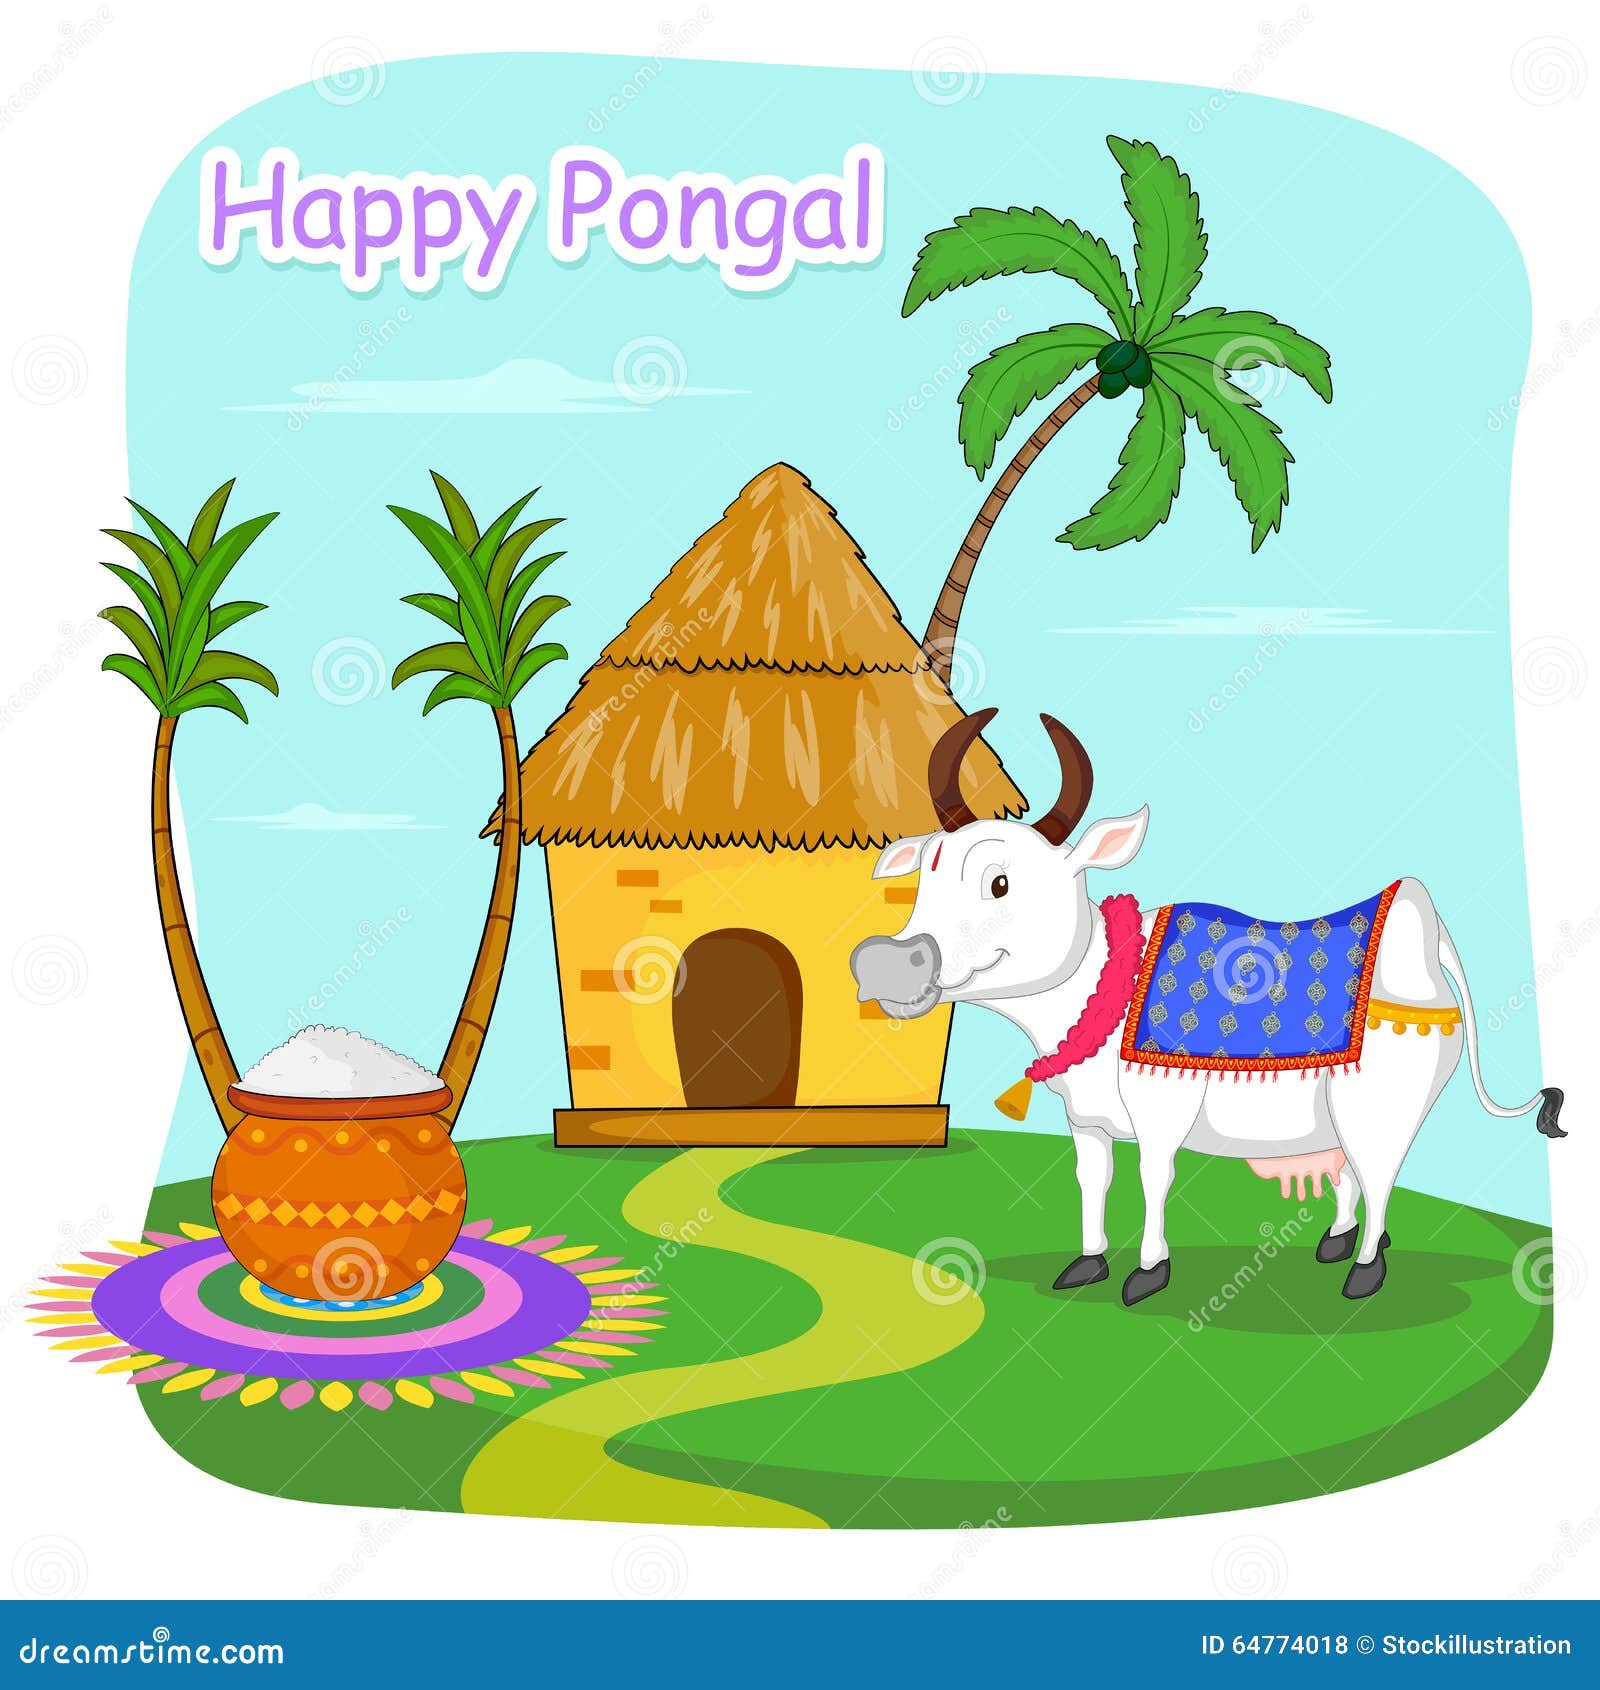 Happy Pongal celebration stock vector. Illustration of agriculture -  64774018